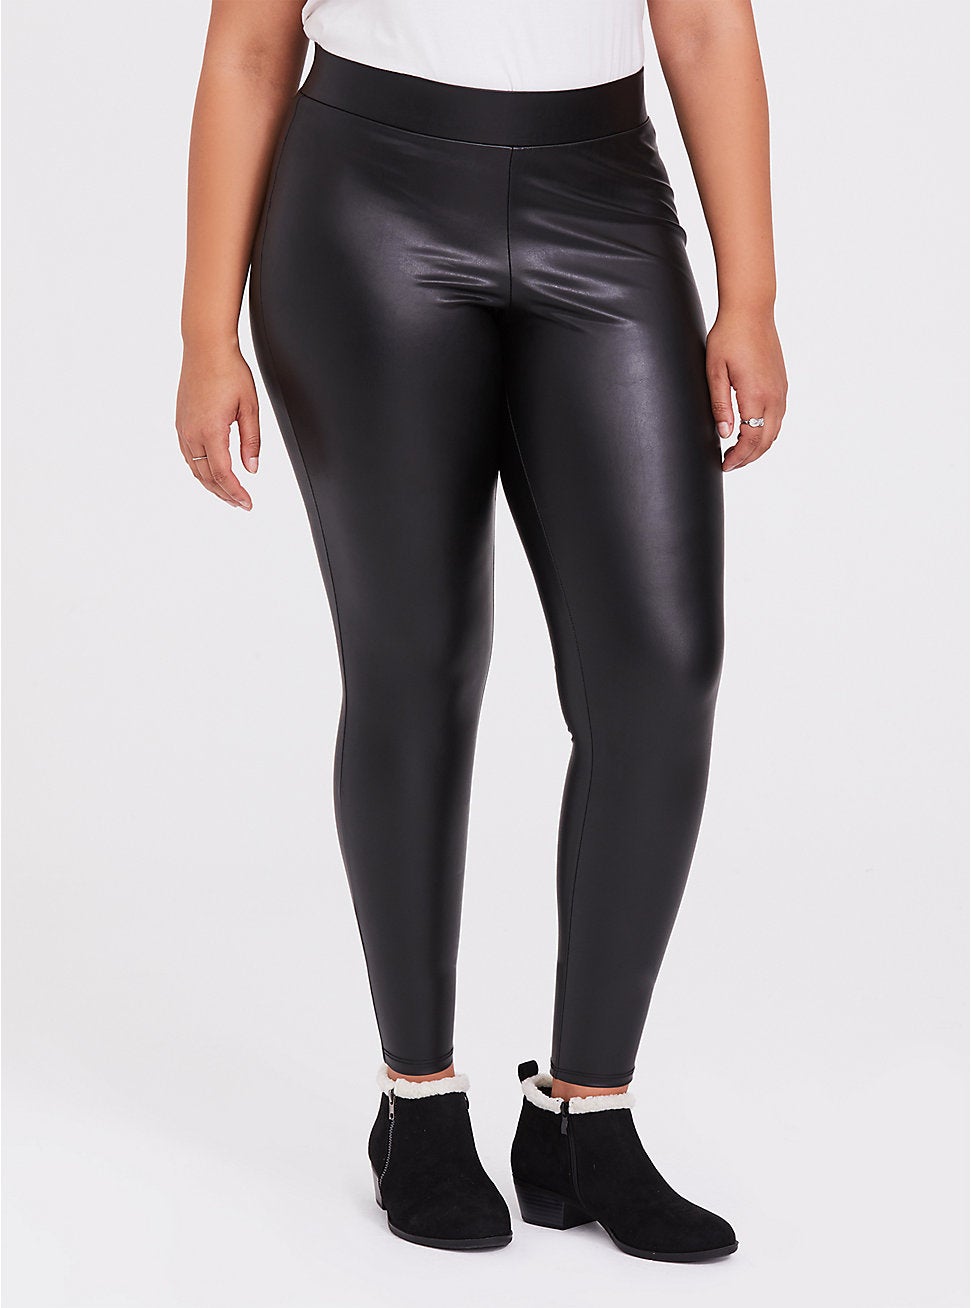 Womens Leggings Fleece Lined Faux Leather Long Pants Casual Stretch High  Waisted Thermal Tights Thick Trouser